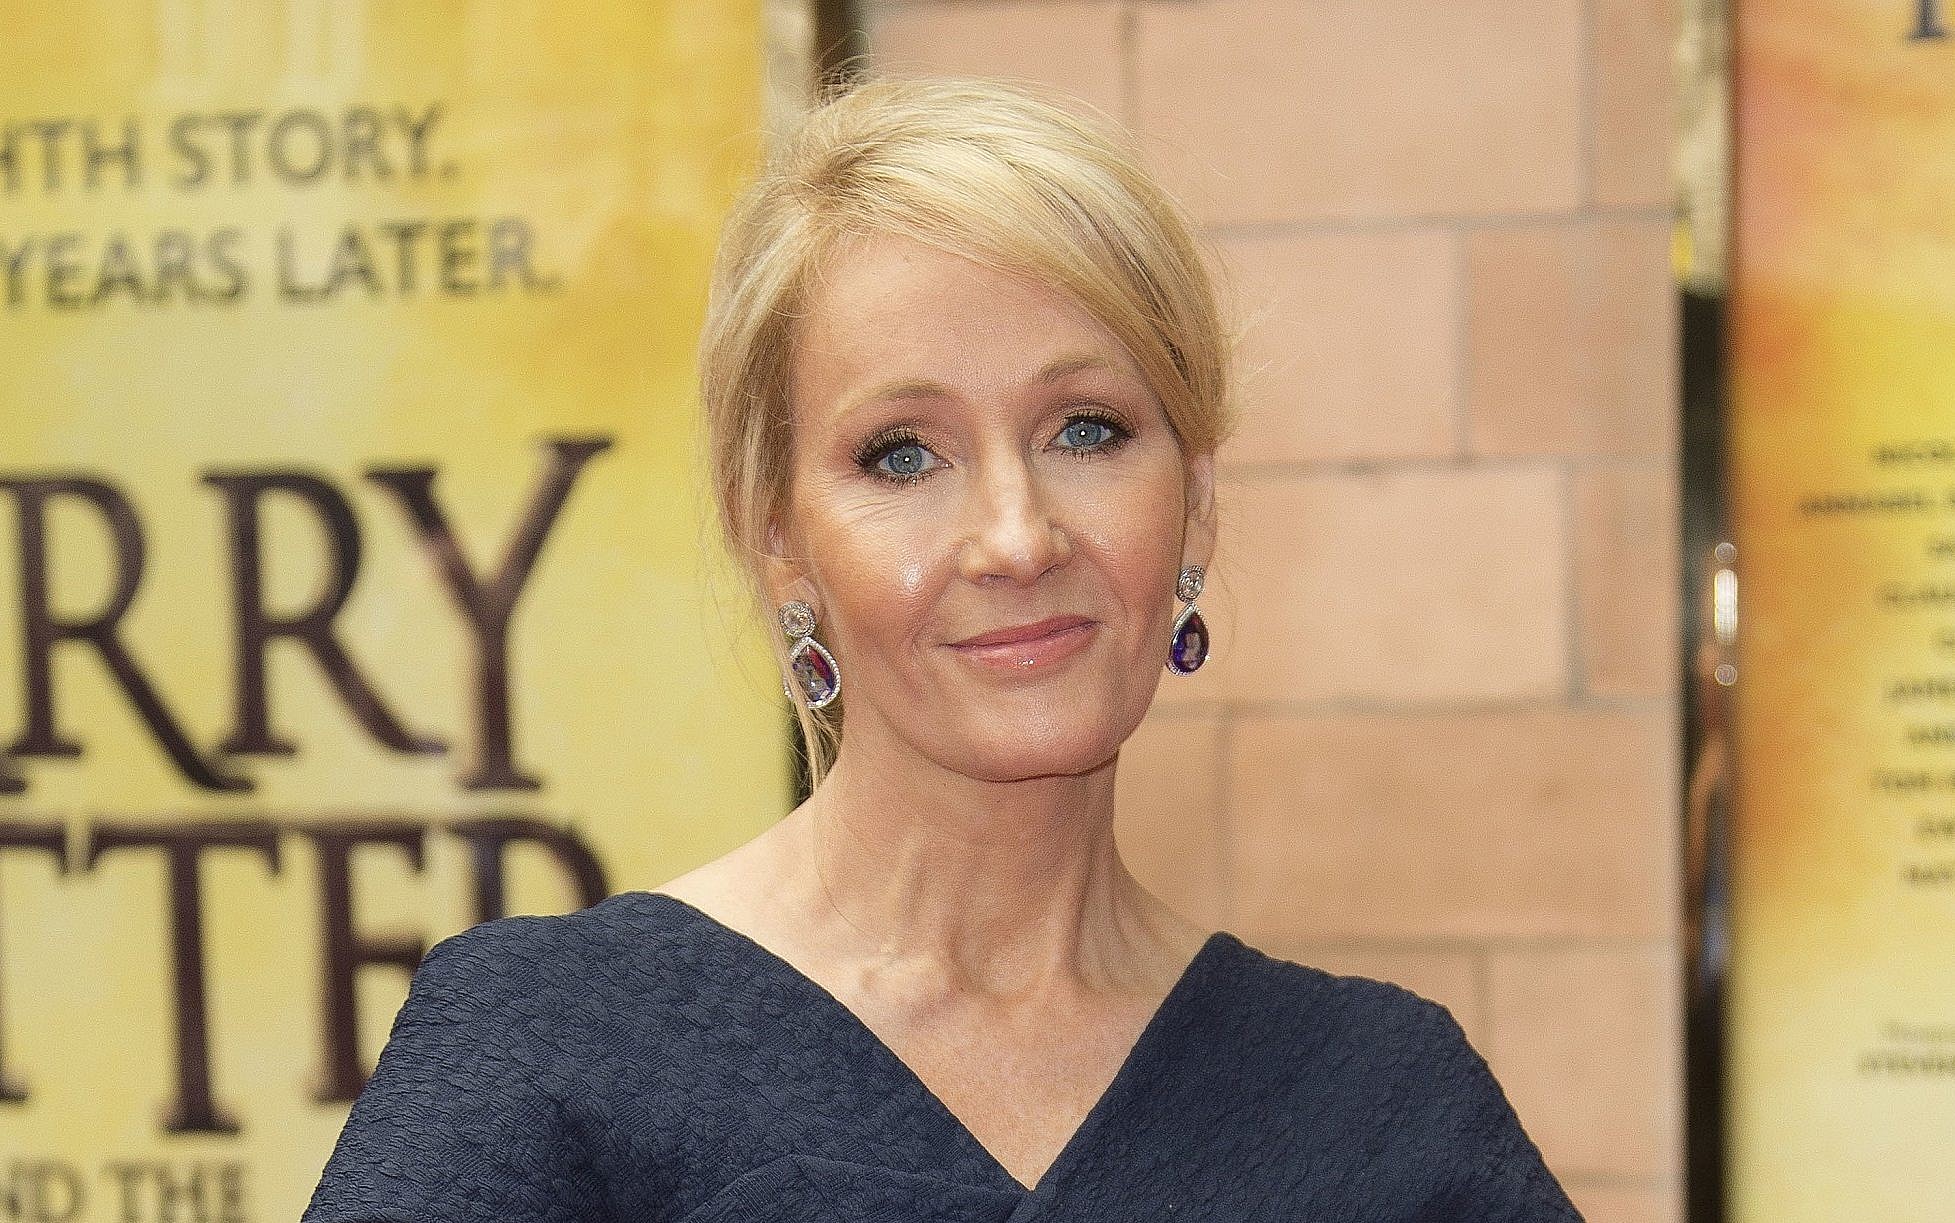 a-complete-breakdown-of-the-j-k-rowling-transgender-comments